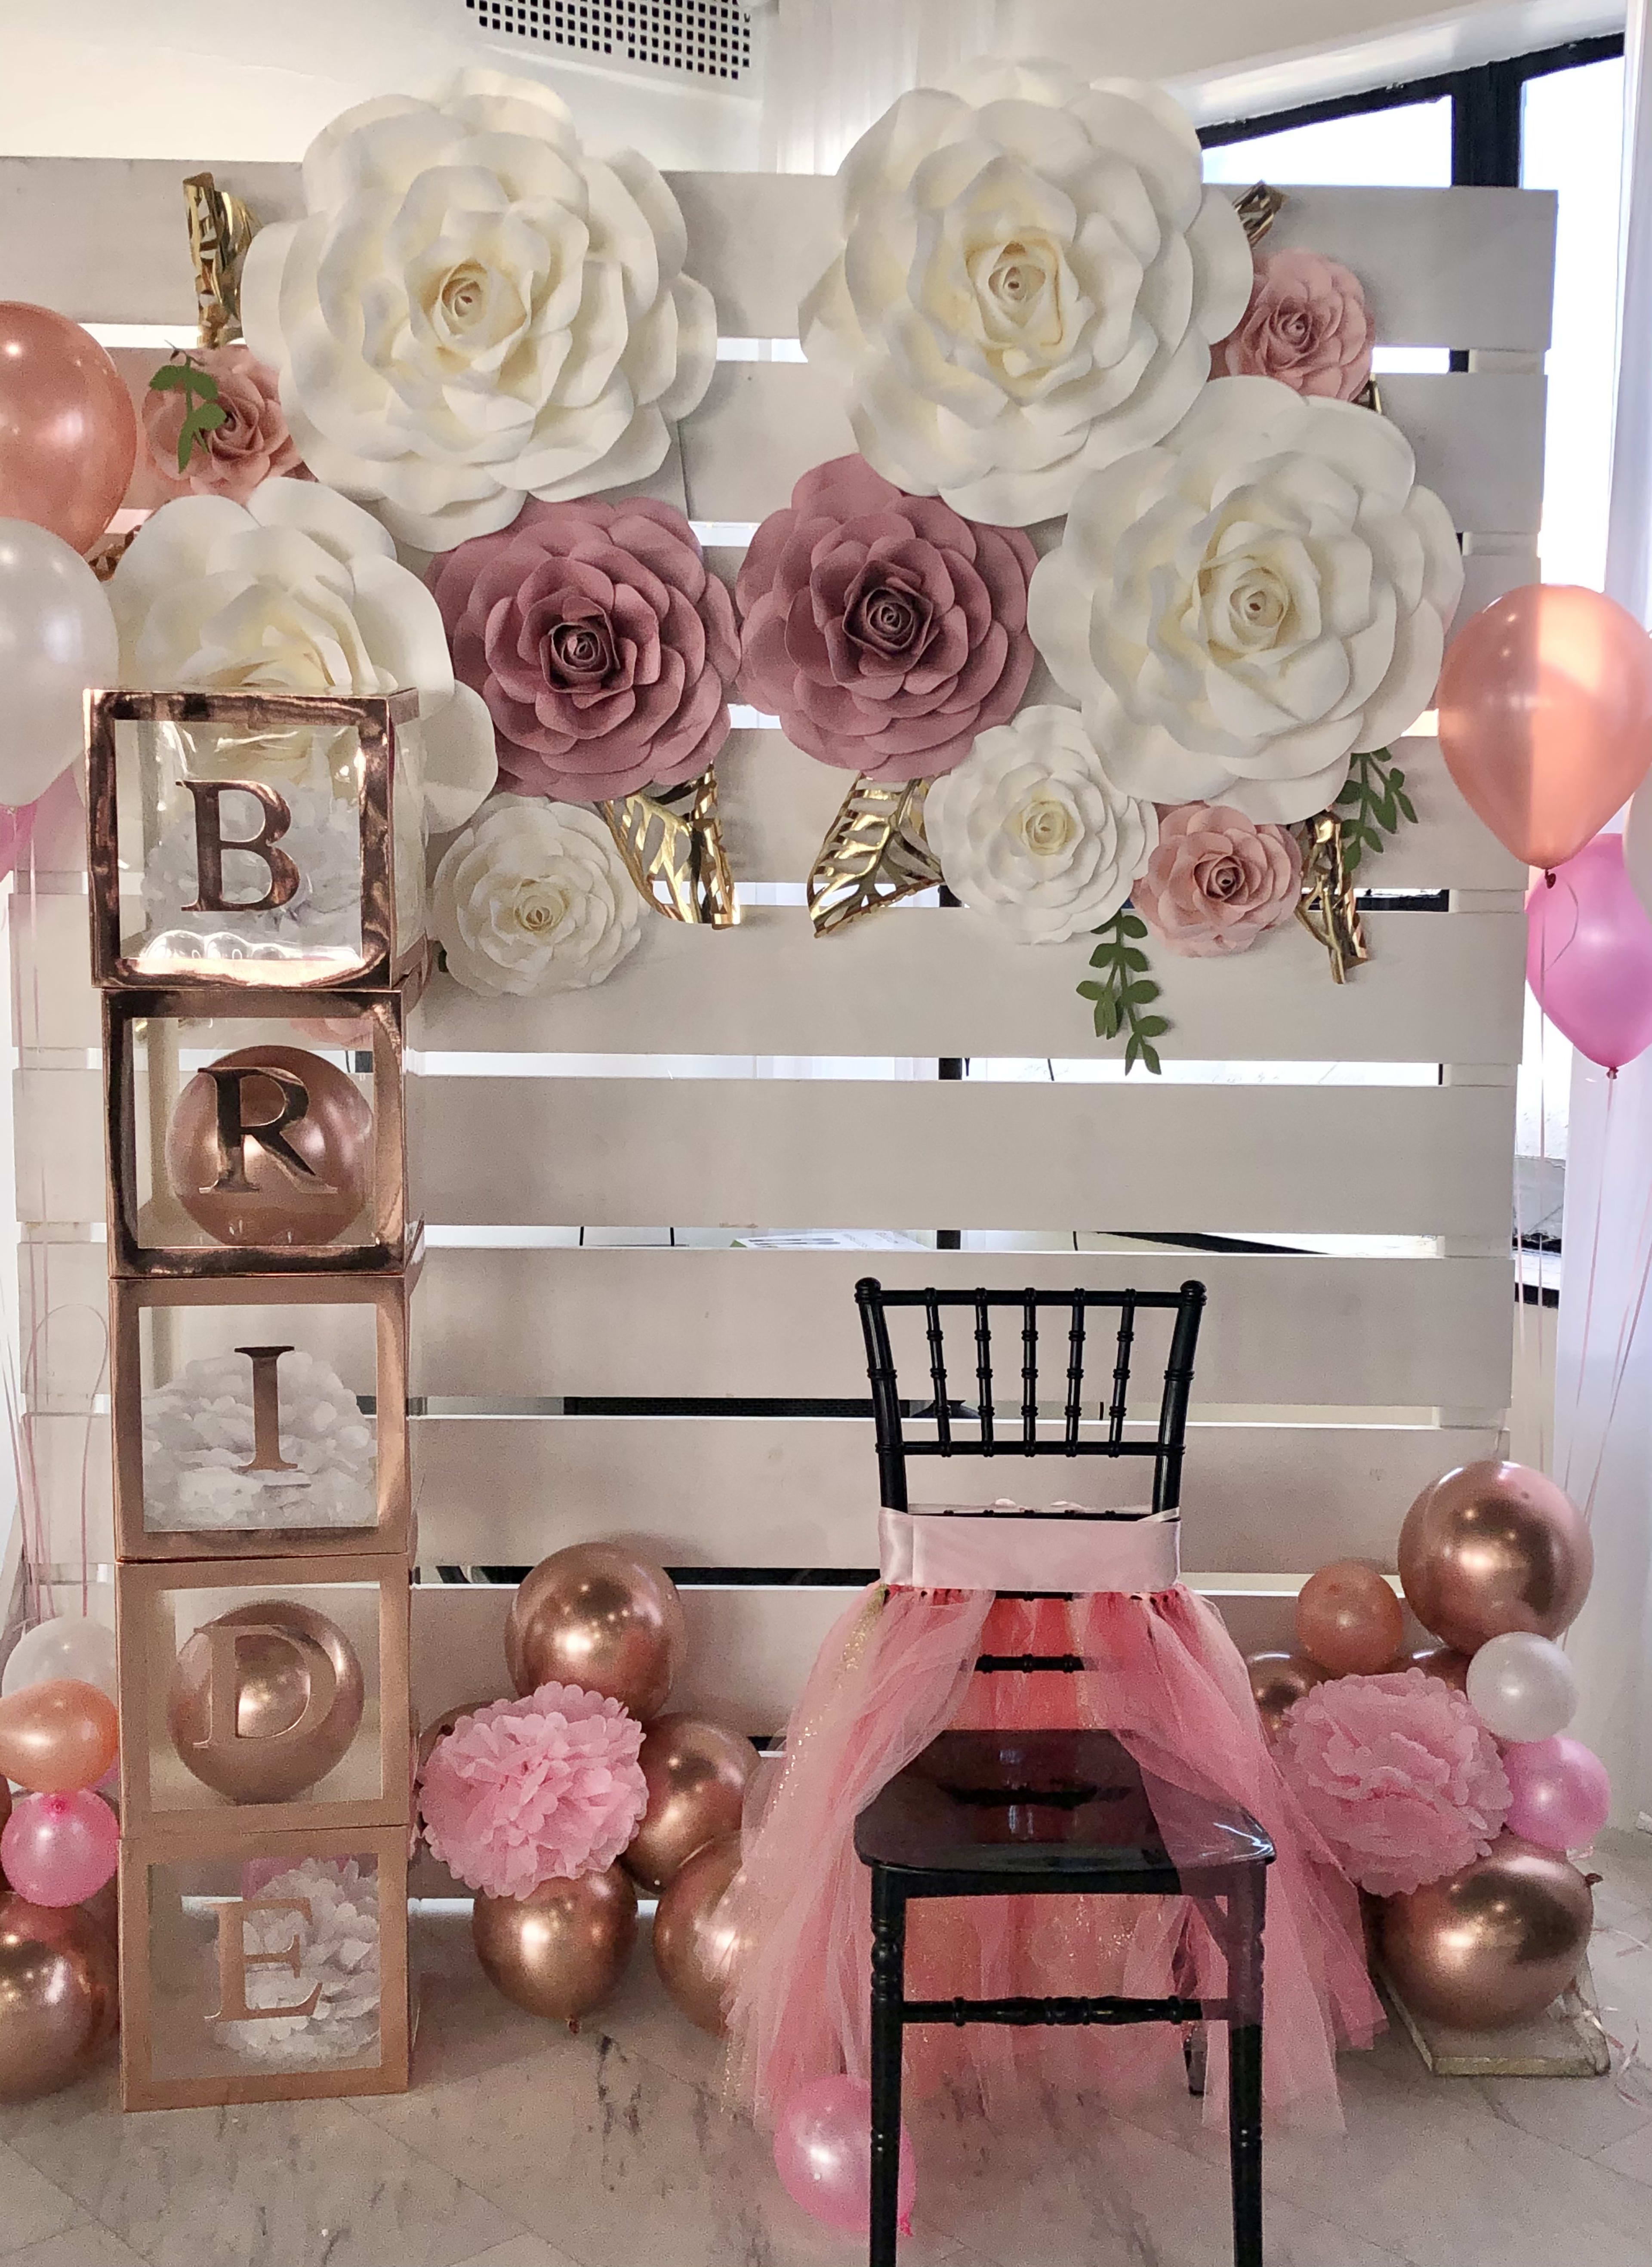 A garden table adorned with pink and white balloons and one chair for a bridal shower.